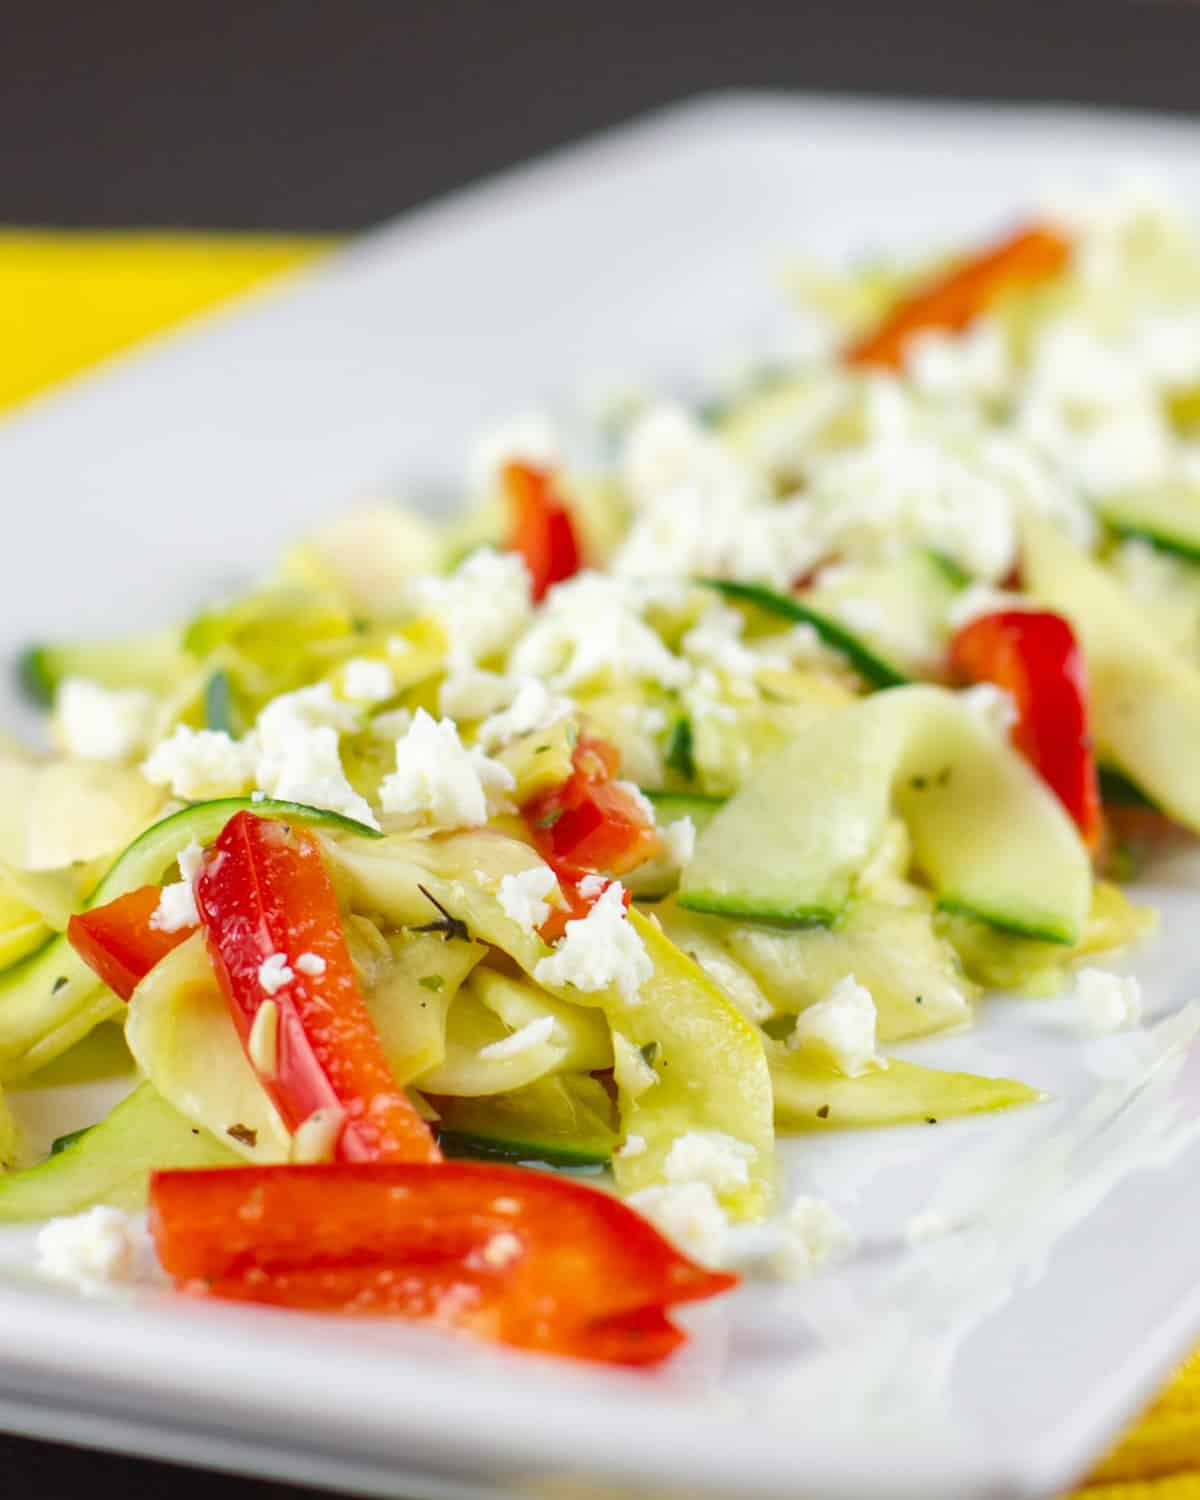 A vegetable salad with crumbled feta cheese.